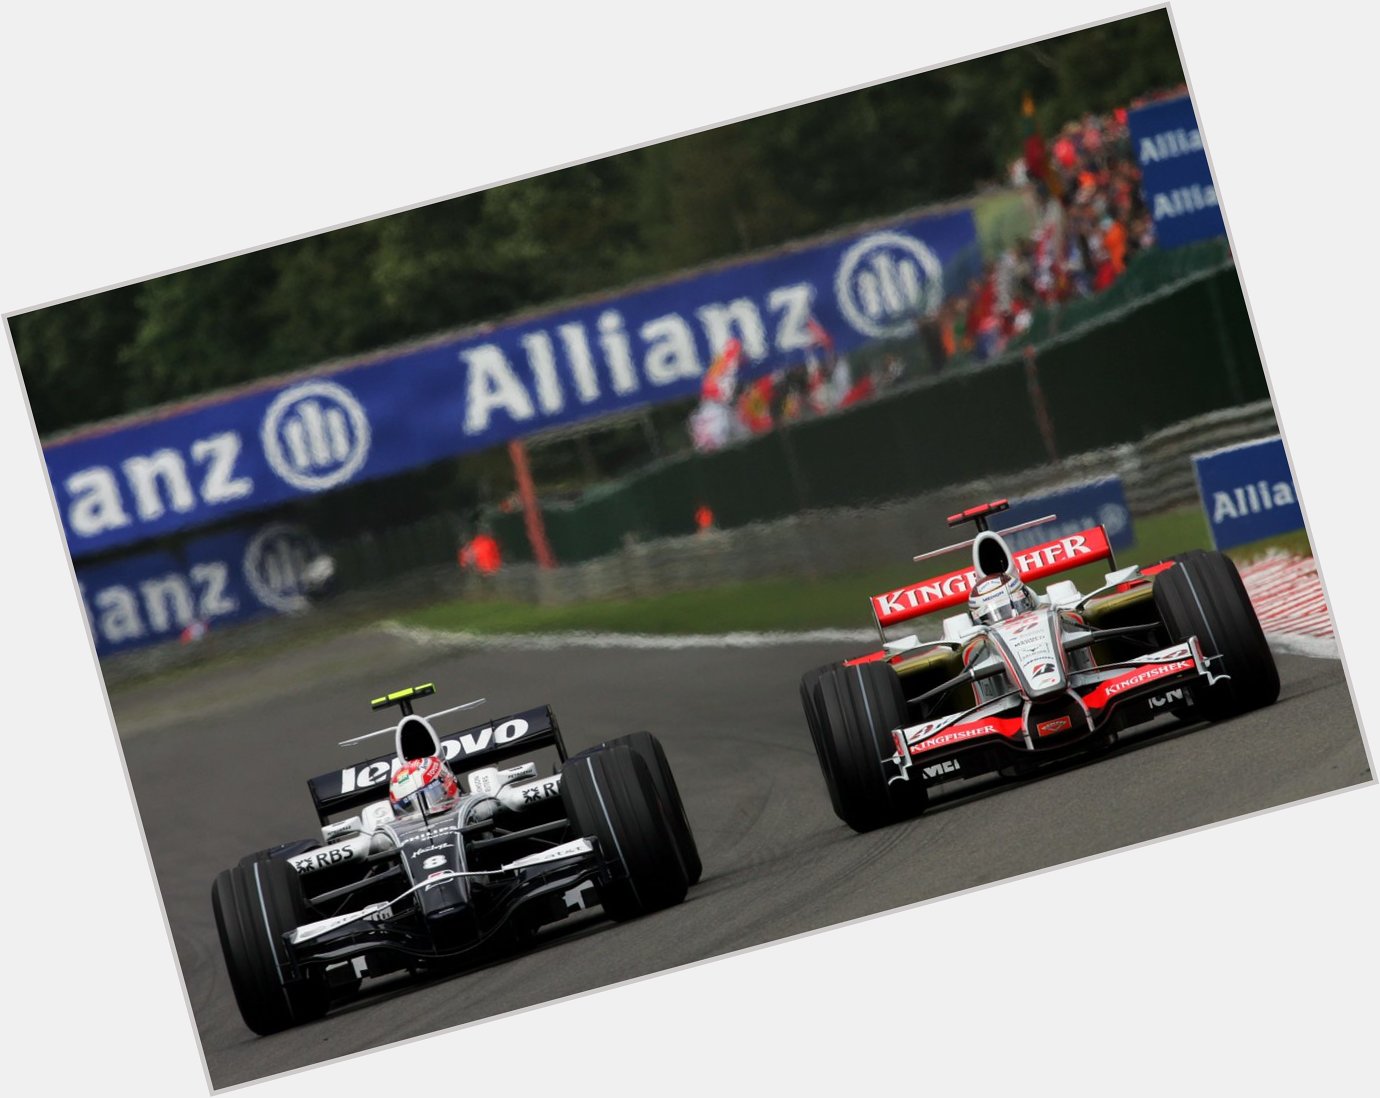 Happy Birthday to former racers Kazuki Nakajima and Adrian Sutil!

Hope you\re keeping it flat out 